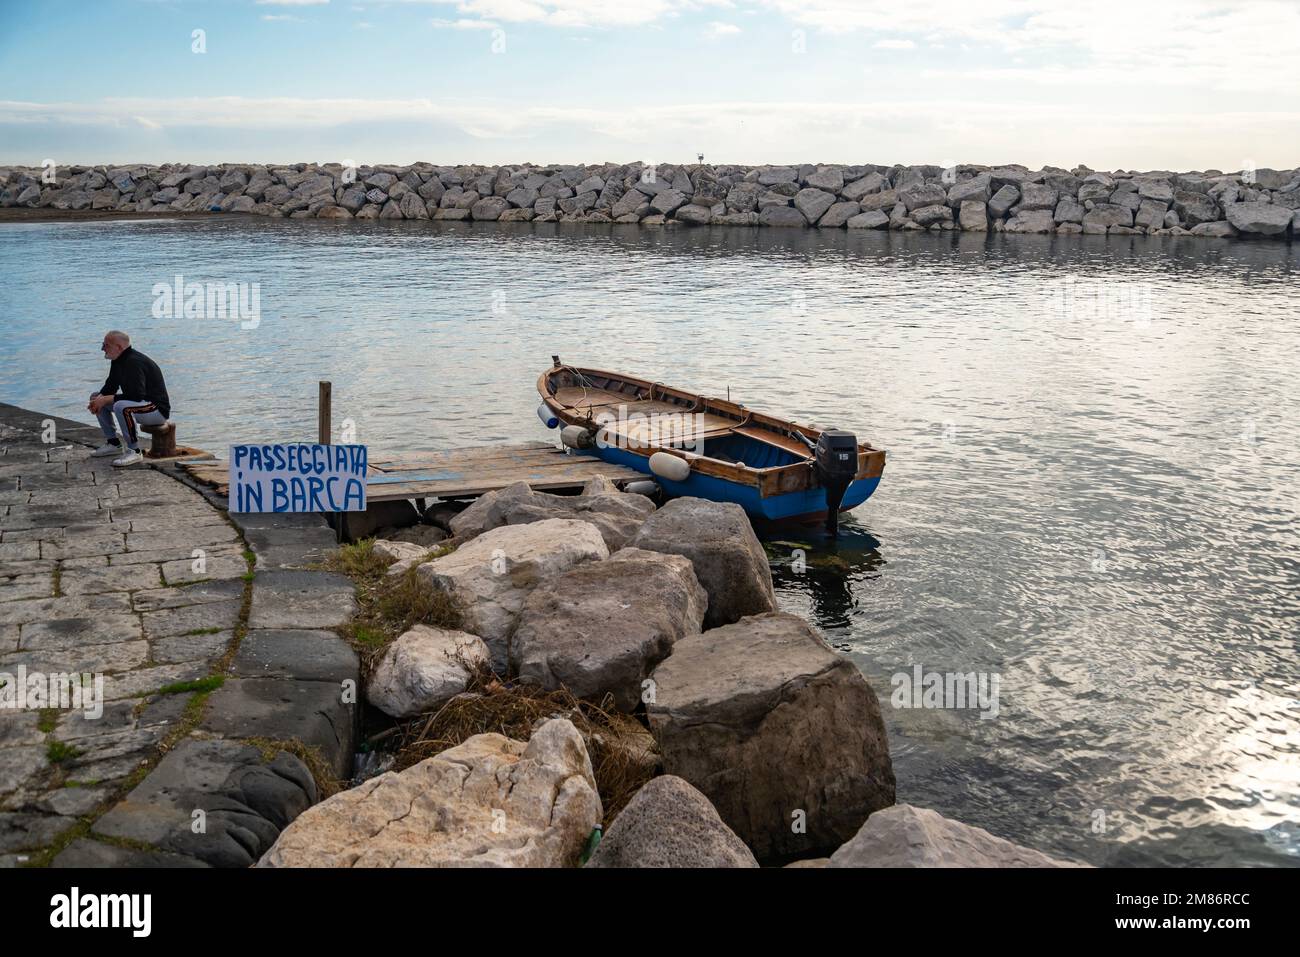 Naples, Italy - December 25, 2022: Winter day on the Mediterranean coast. A man rents a boat at the seafront in Naples, Campania, Italy. Stock Photo